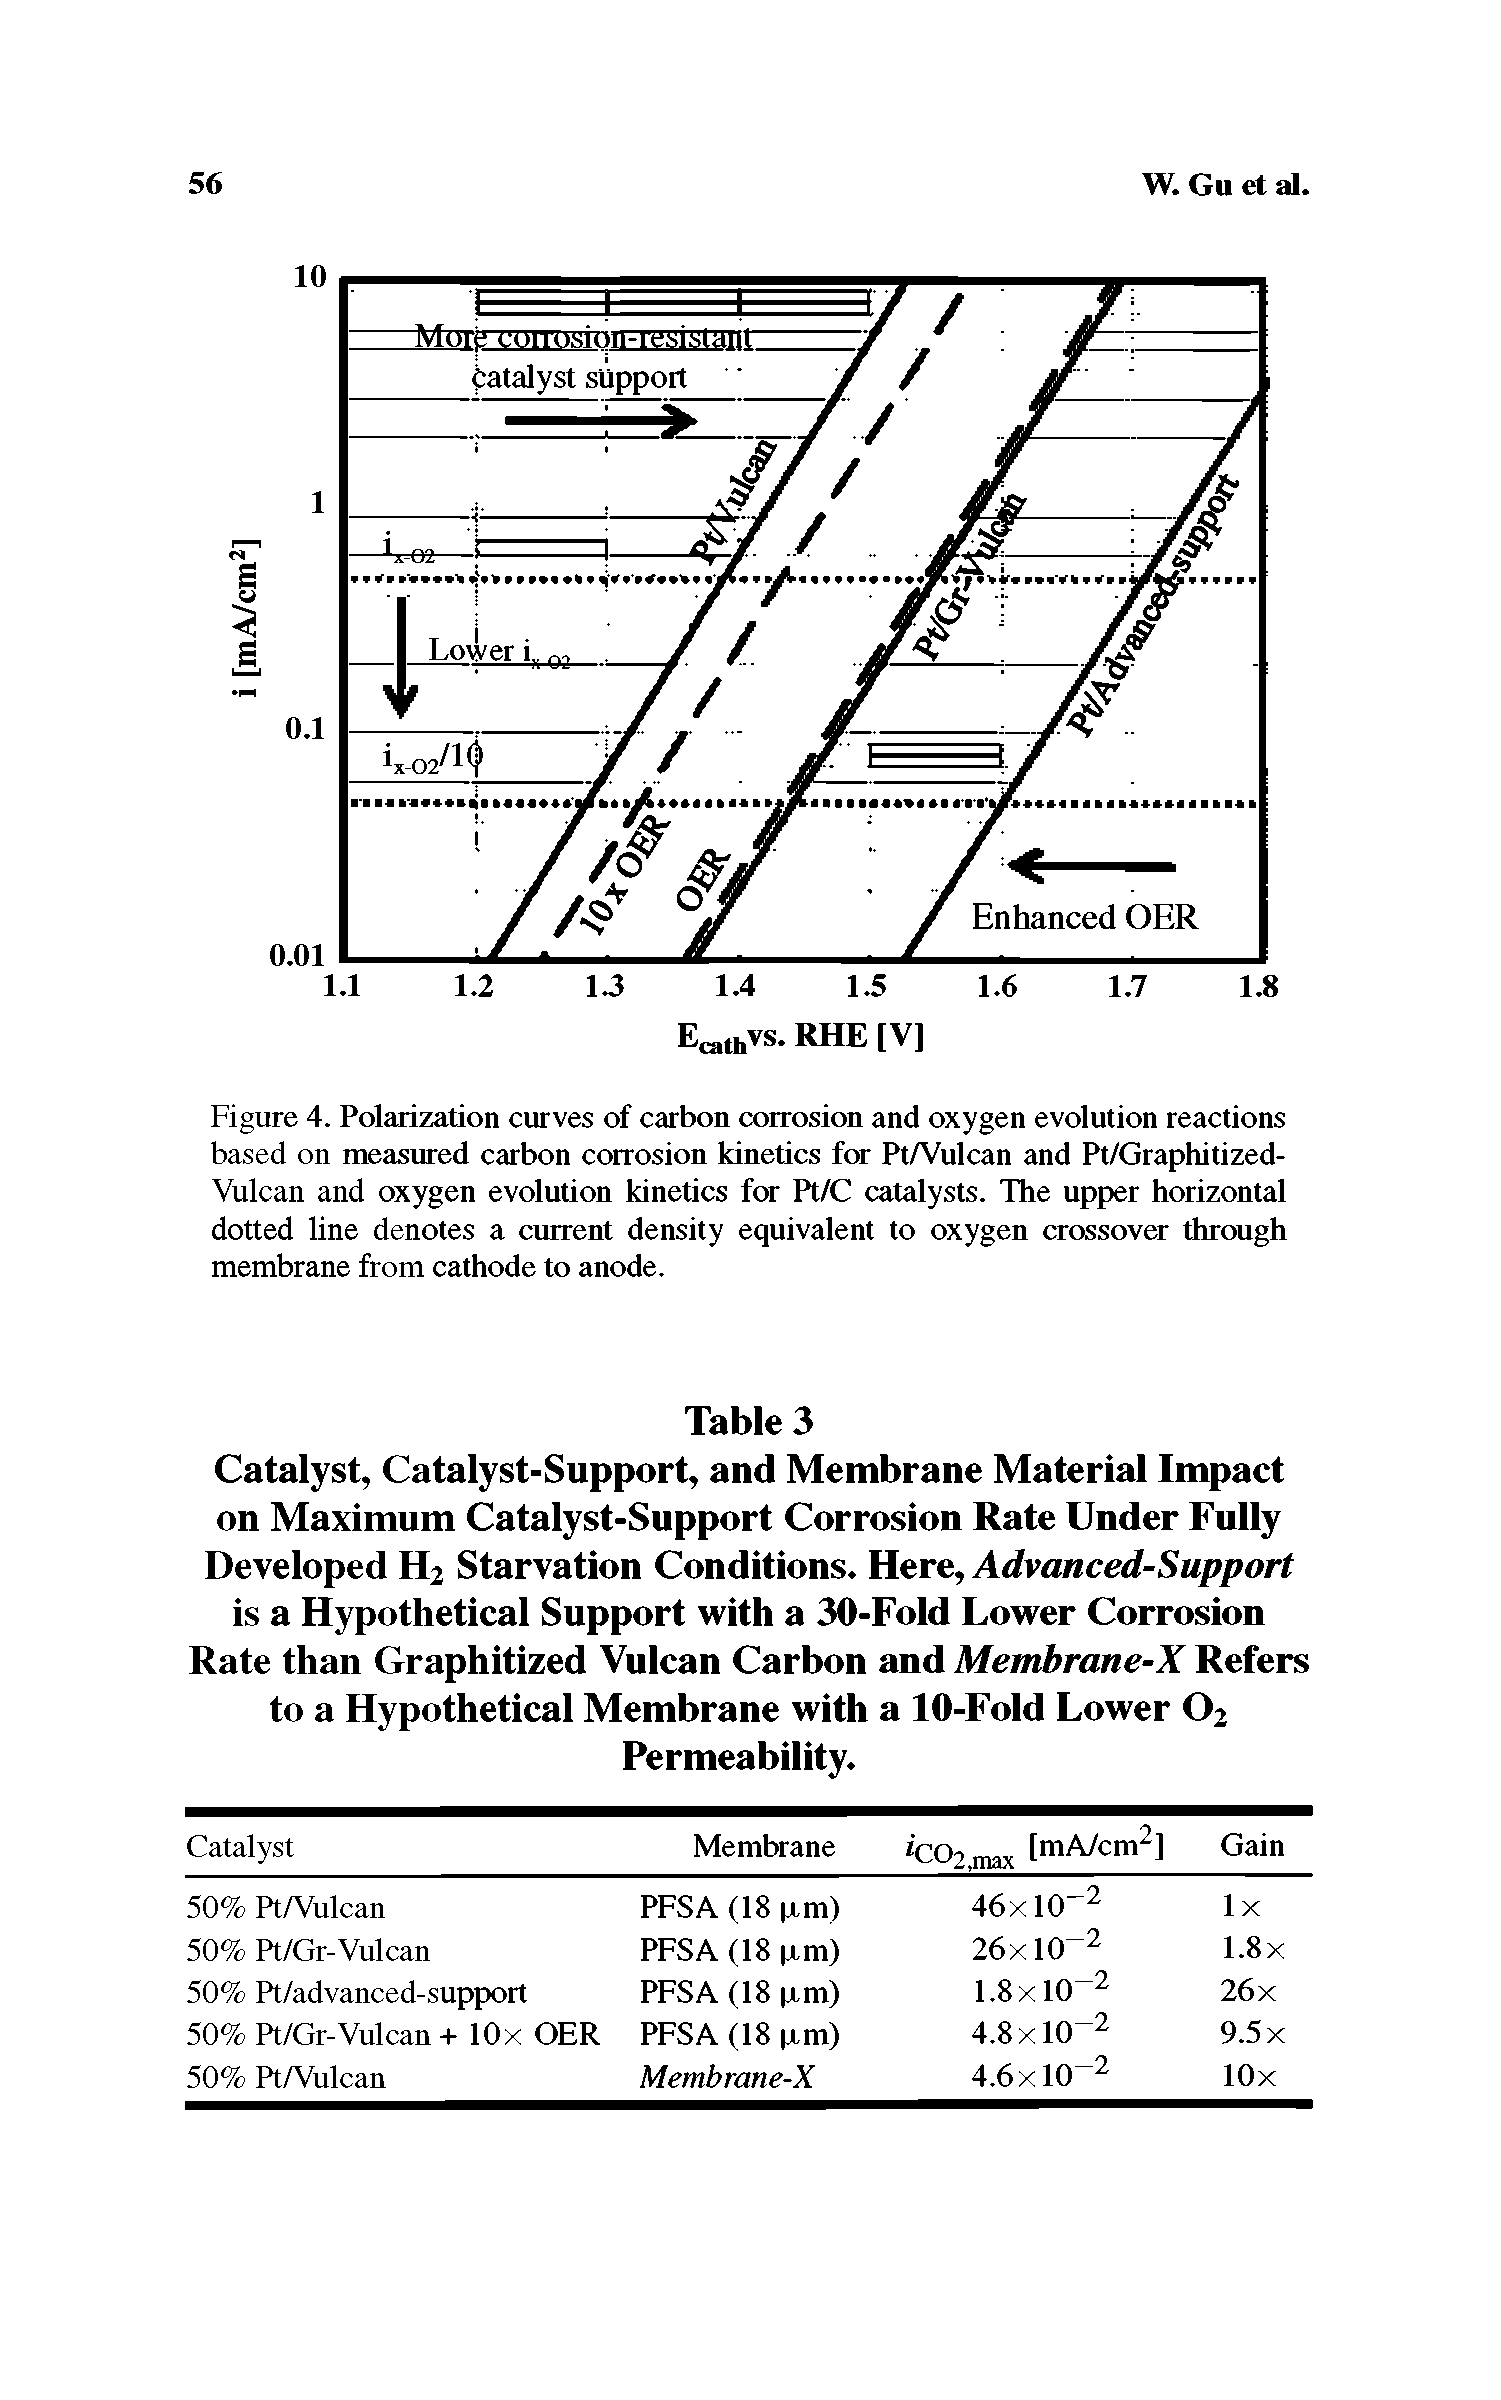 Figure 4. Polarization curves of carbon corrosion and oxygen evolution reactions based on measured carbon corrosion kinetics for Pt/Vulcan and Pt/Graphitized-Vulcan and oxygen evolution kinetics for Pt/C catalysts. The upper horizontal dotted line denotes a current density equivalent to oxygen crossover through membrane from cathode to anode.